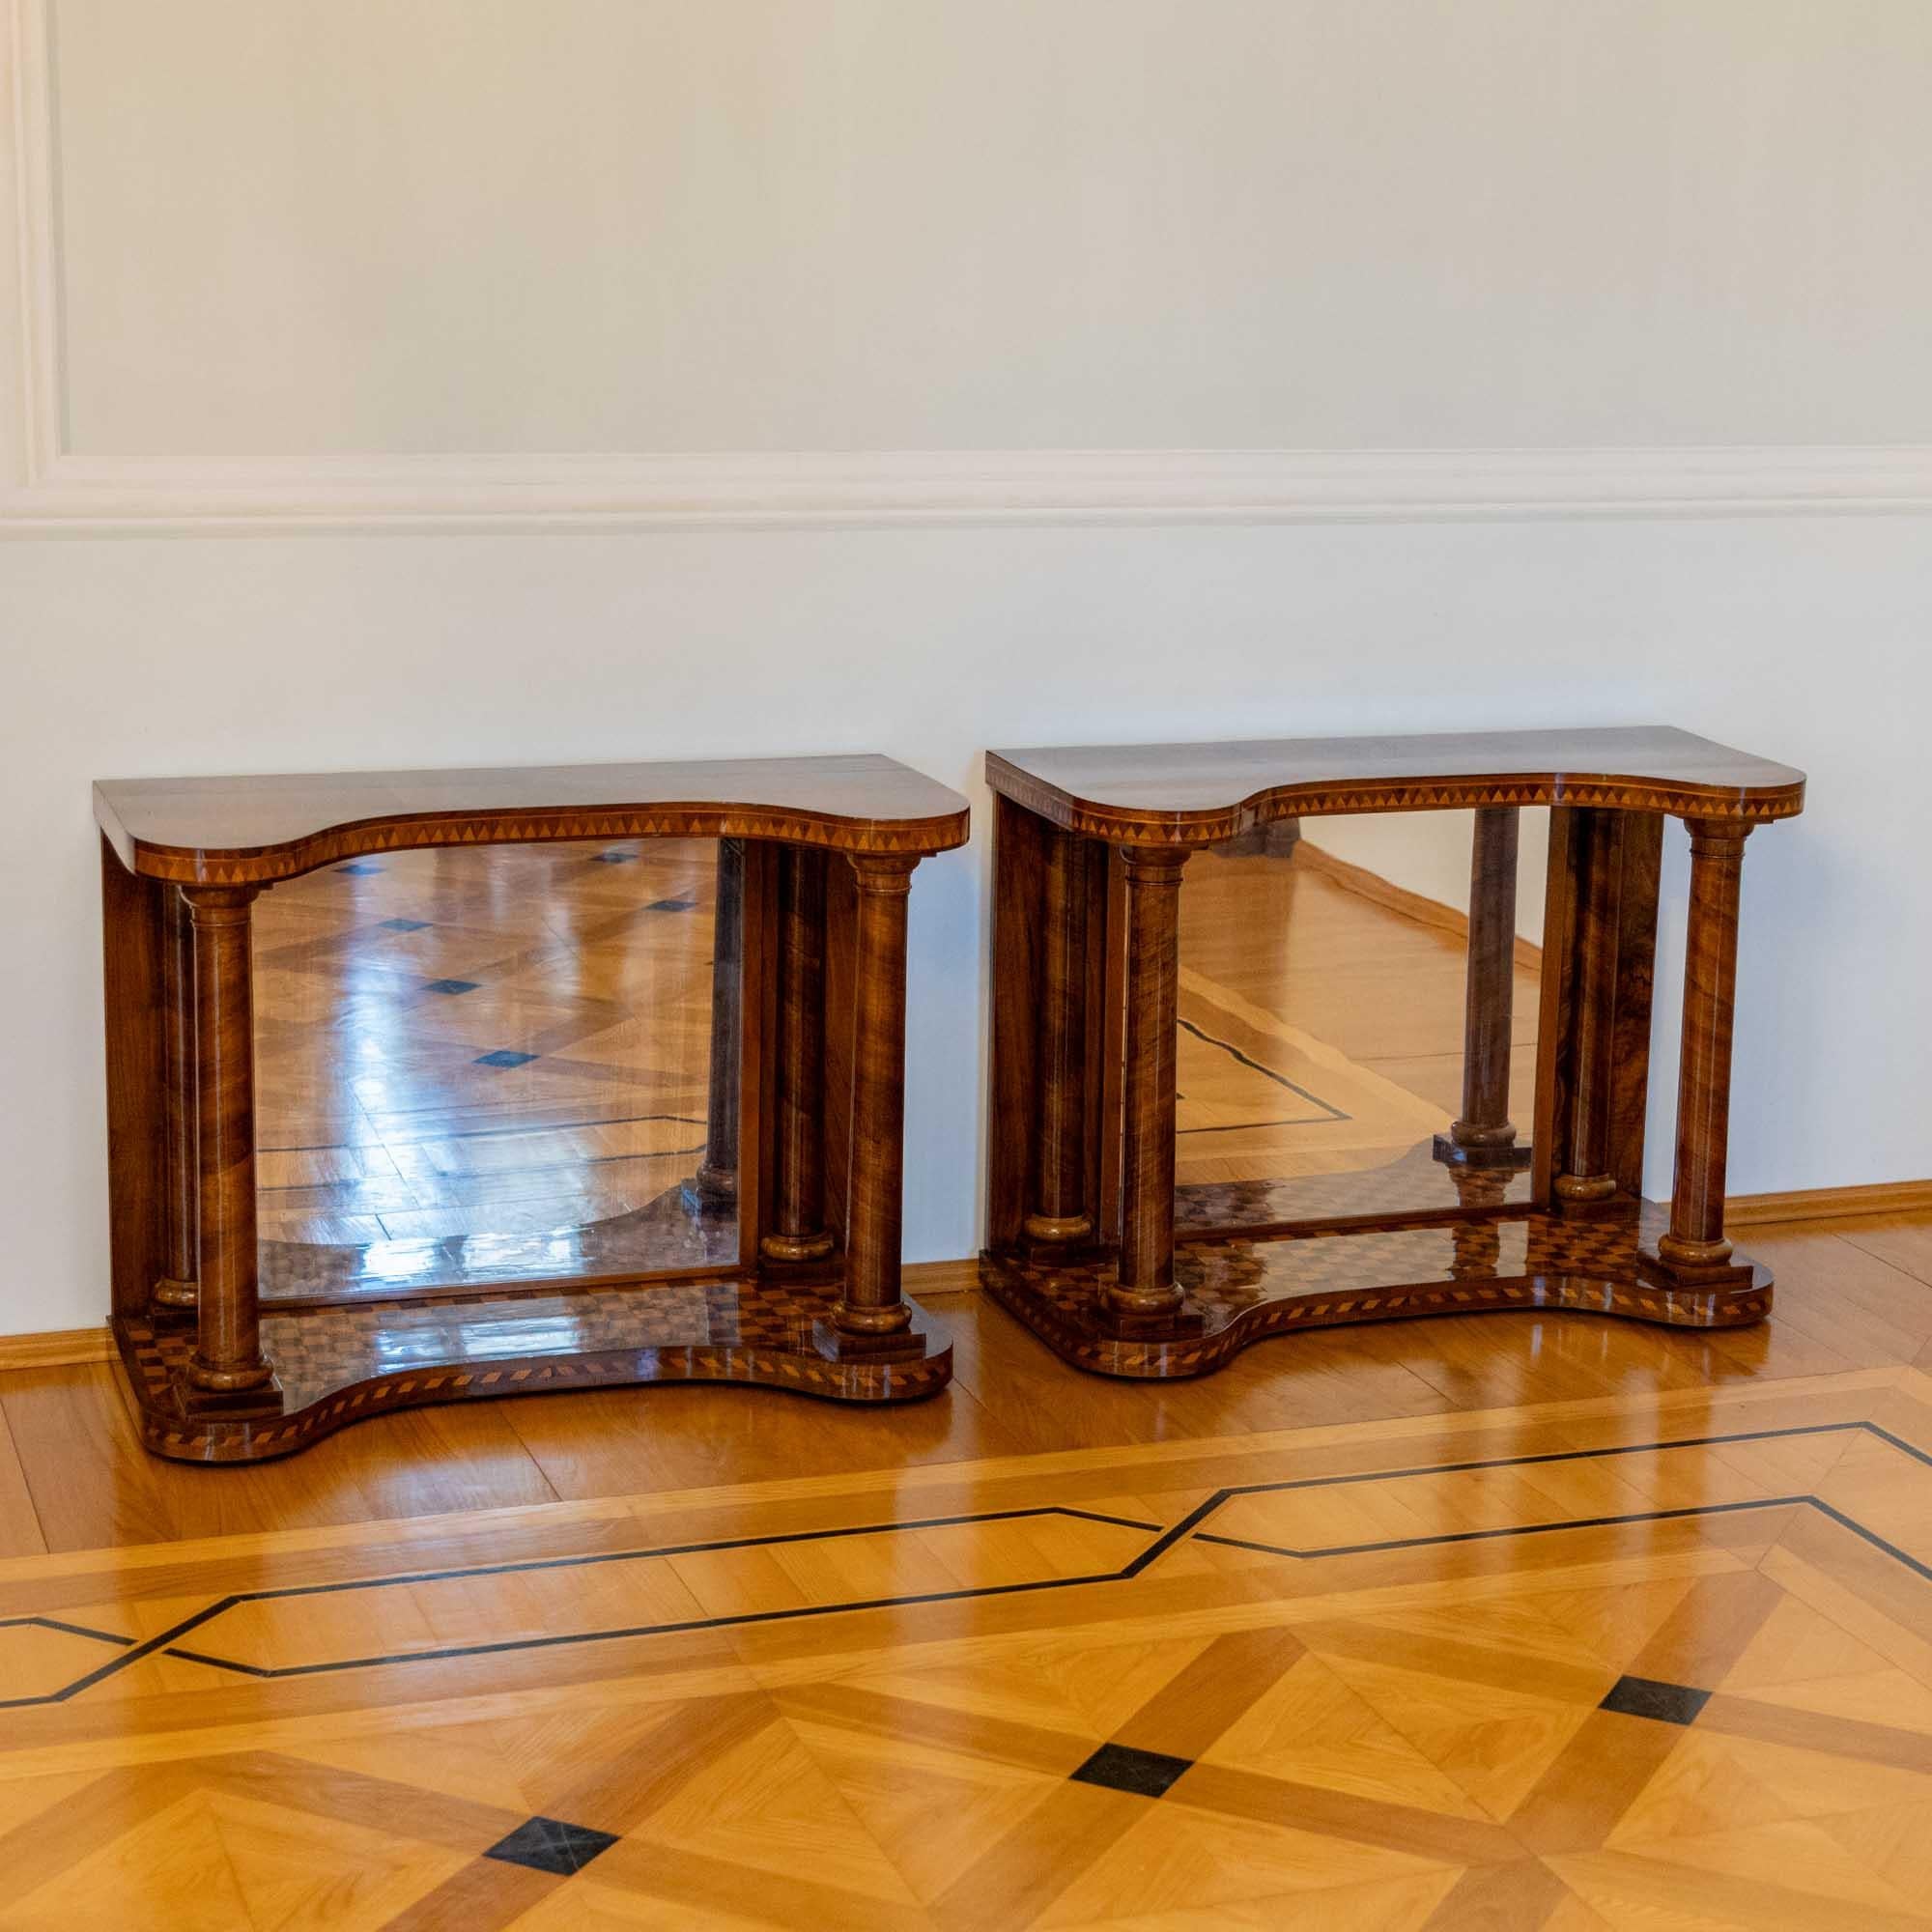 Pair of Parquetry Console Tables with Mirrors, Mid-19th Century For Sale 2